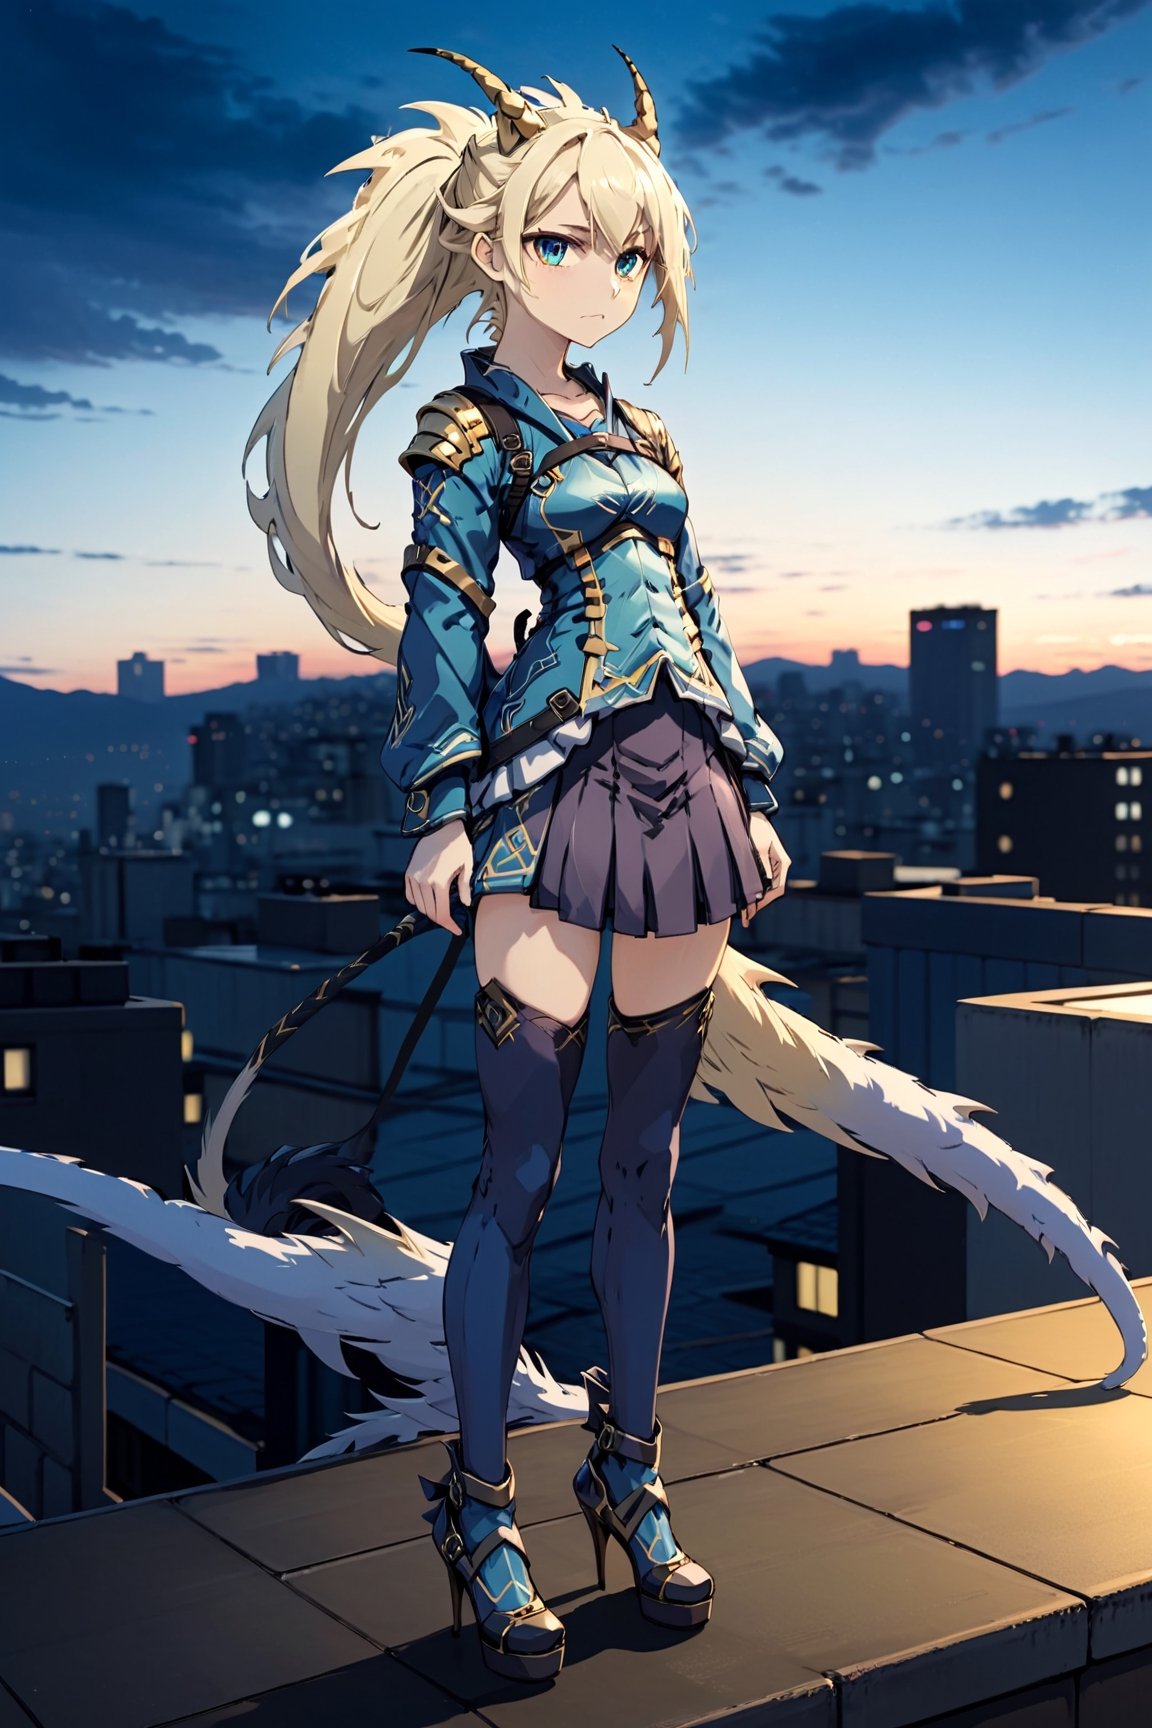 photograph, full body, twin-tail hair, female student, alone, Japanese, gal fashion, high heels, looking down with scornful eyes, arms folded, rooftop, evening,,dragonarmor,darkart,uwudemon,stalker